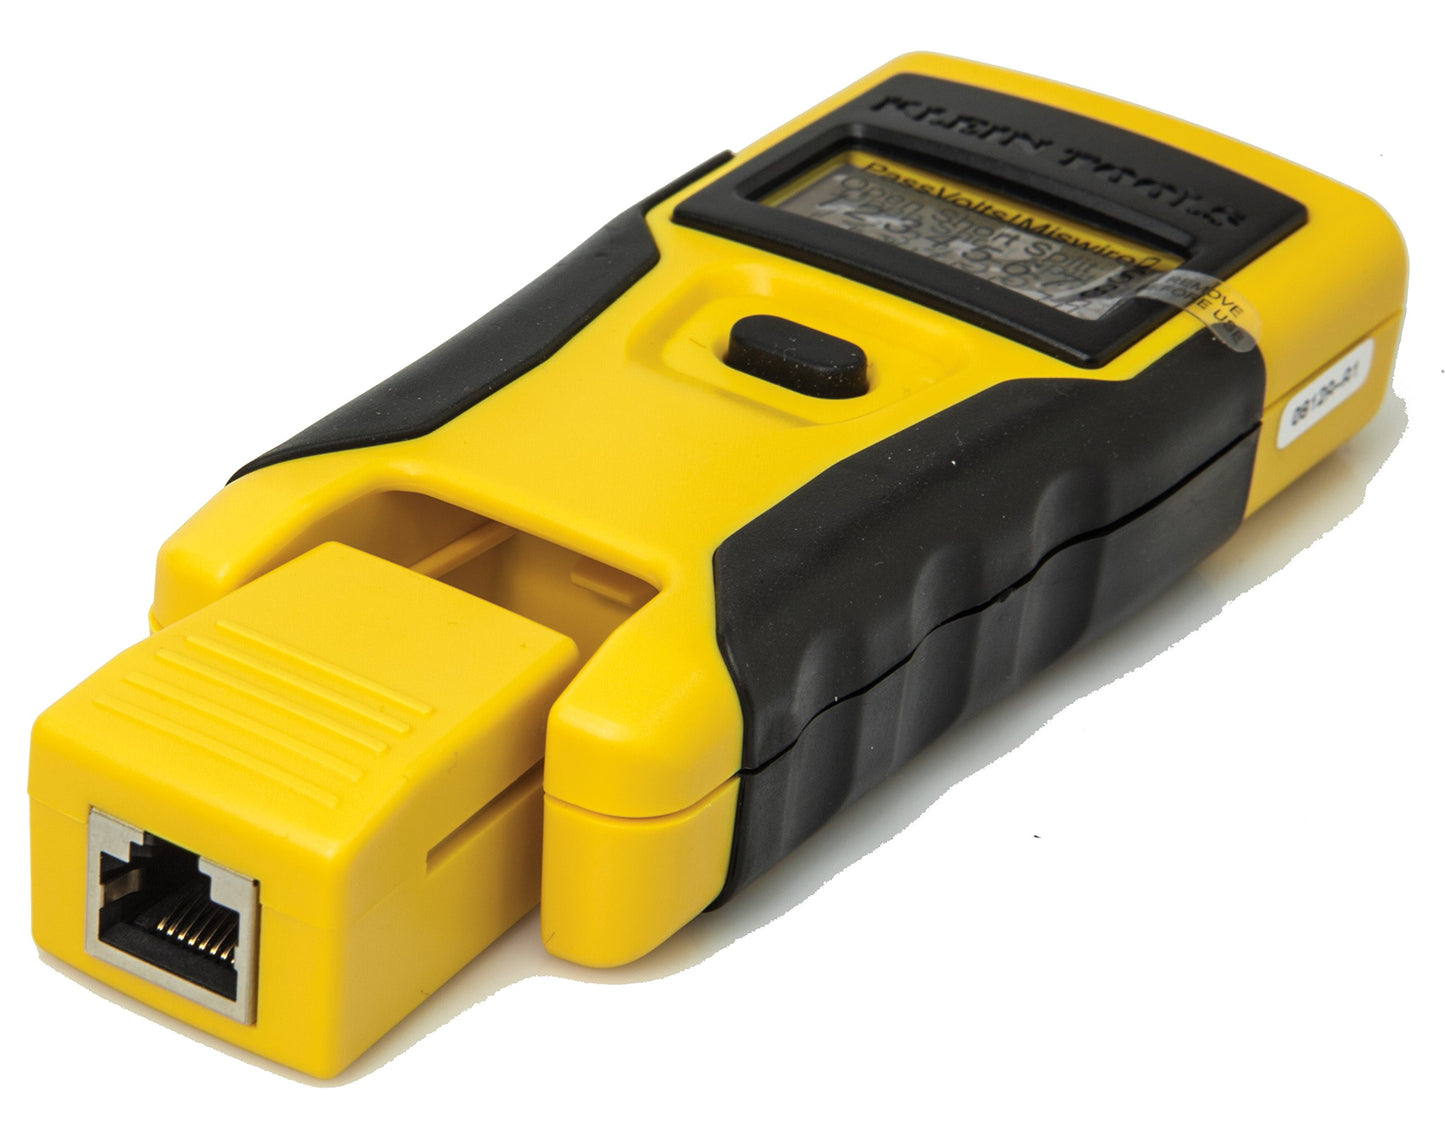 Klein Tools VDV526-052 Cable Tester, LAN Scout Jr. Network Tester / Continuity Tester for RJ45 Data Cable Twisted Pair Connections